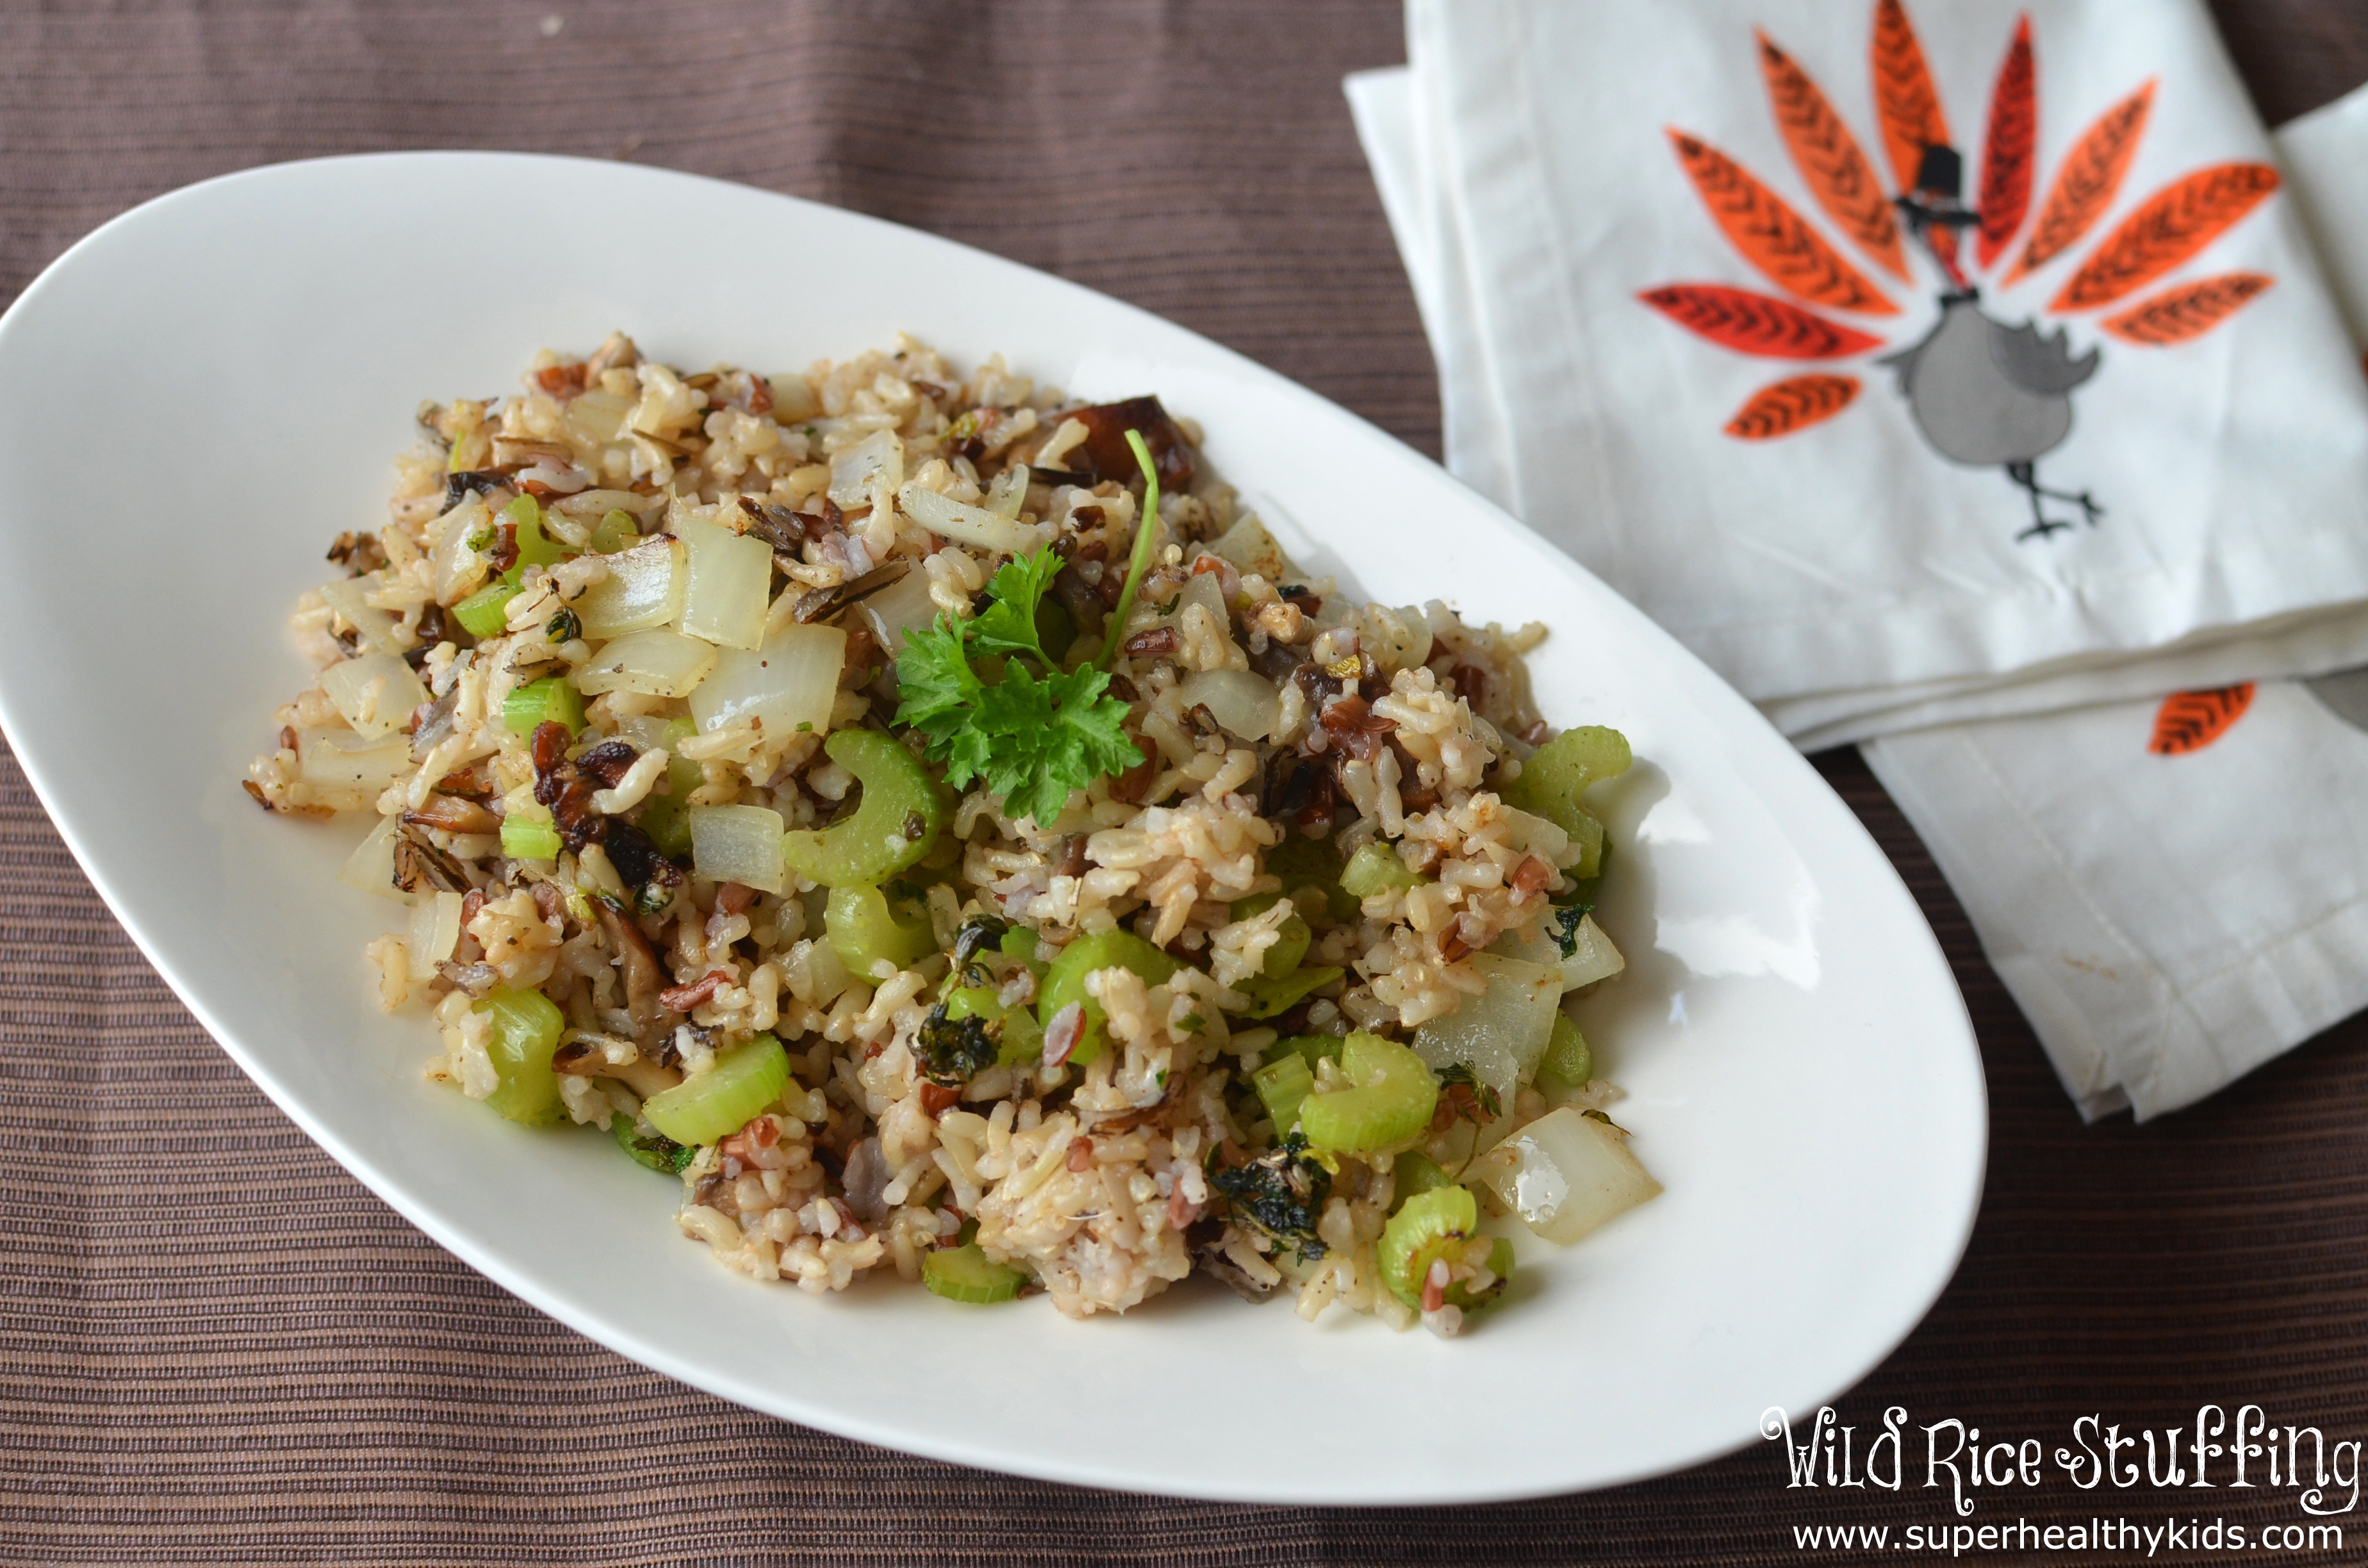 Wild Rice Healthy
 Your plete Healthy Holiday Meal with Wild Rice Stuffing